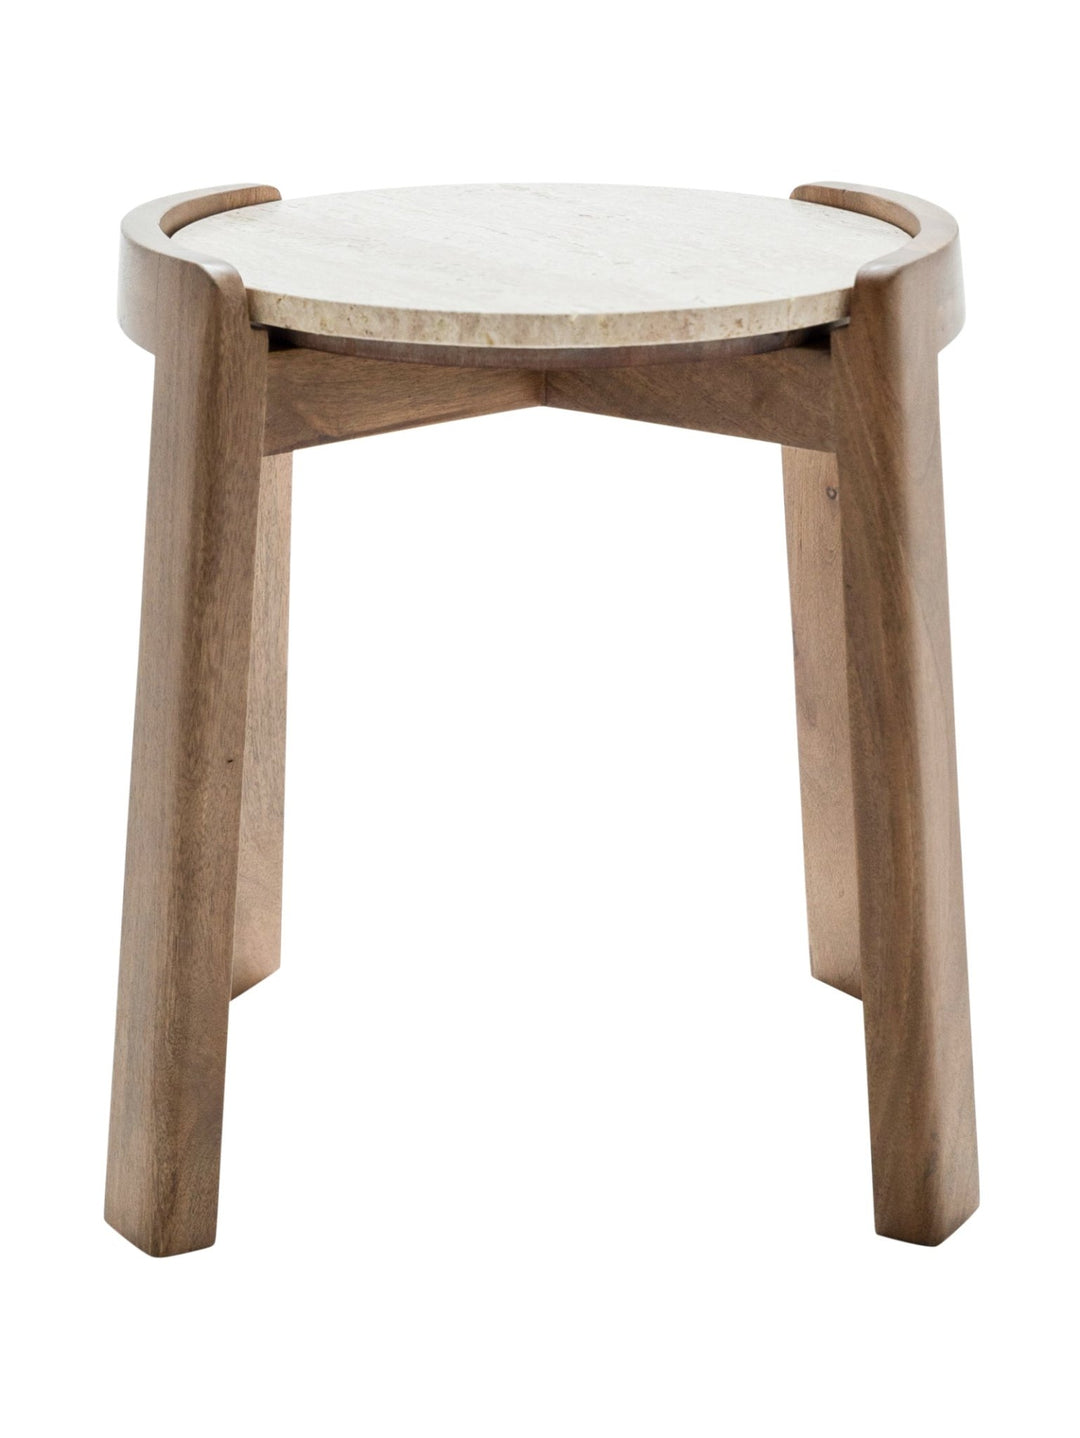 Curved Side Table in Travertine - side table - Hertex Haus - Furniture